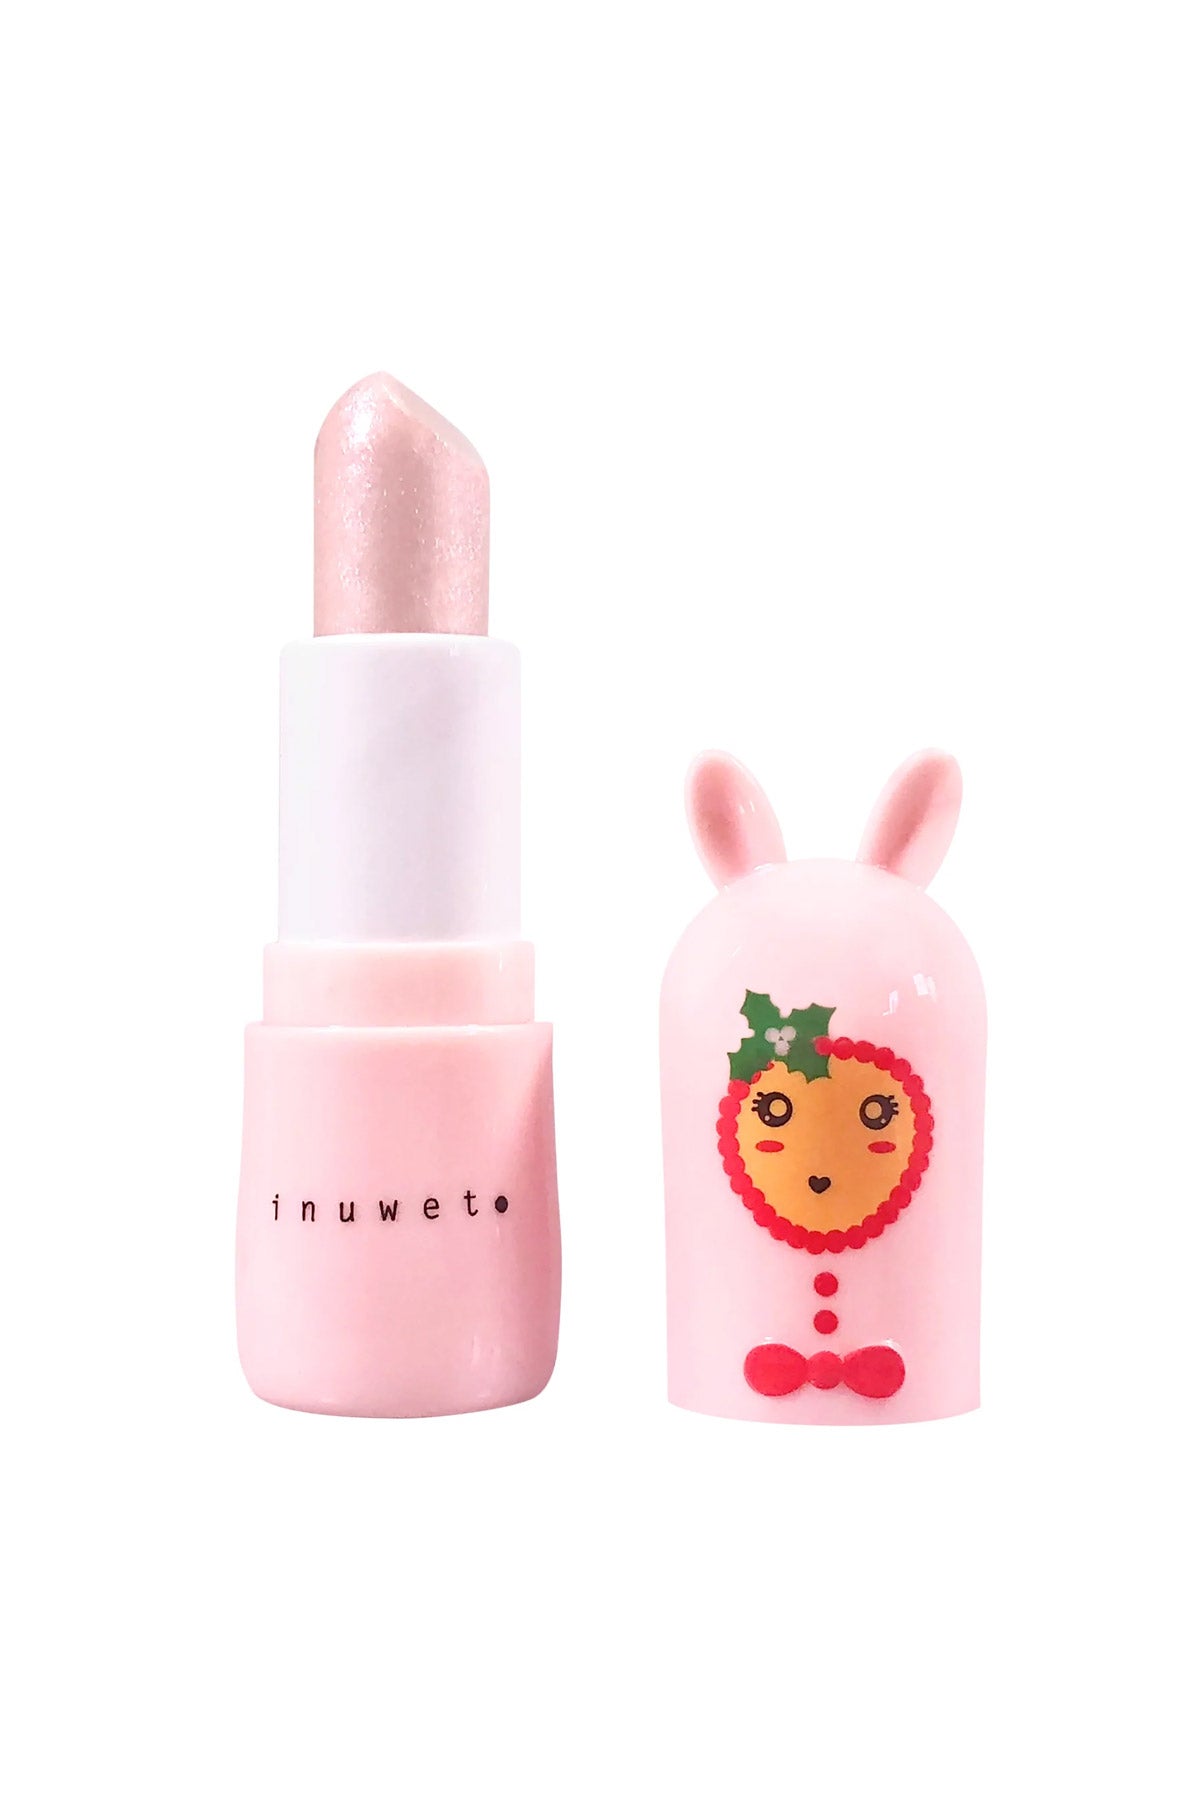 Inuwet - Bunny Lip Balm Candy Cane